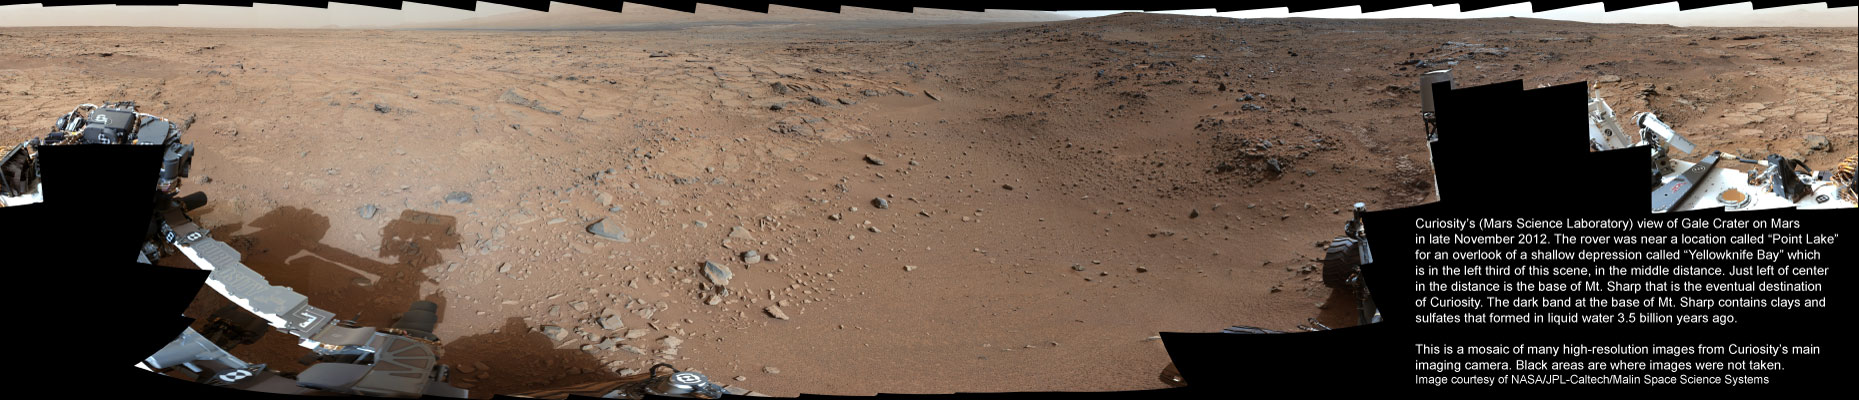 Gale Crater on Mars "Yellowknife Bay"